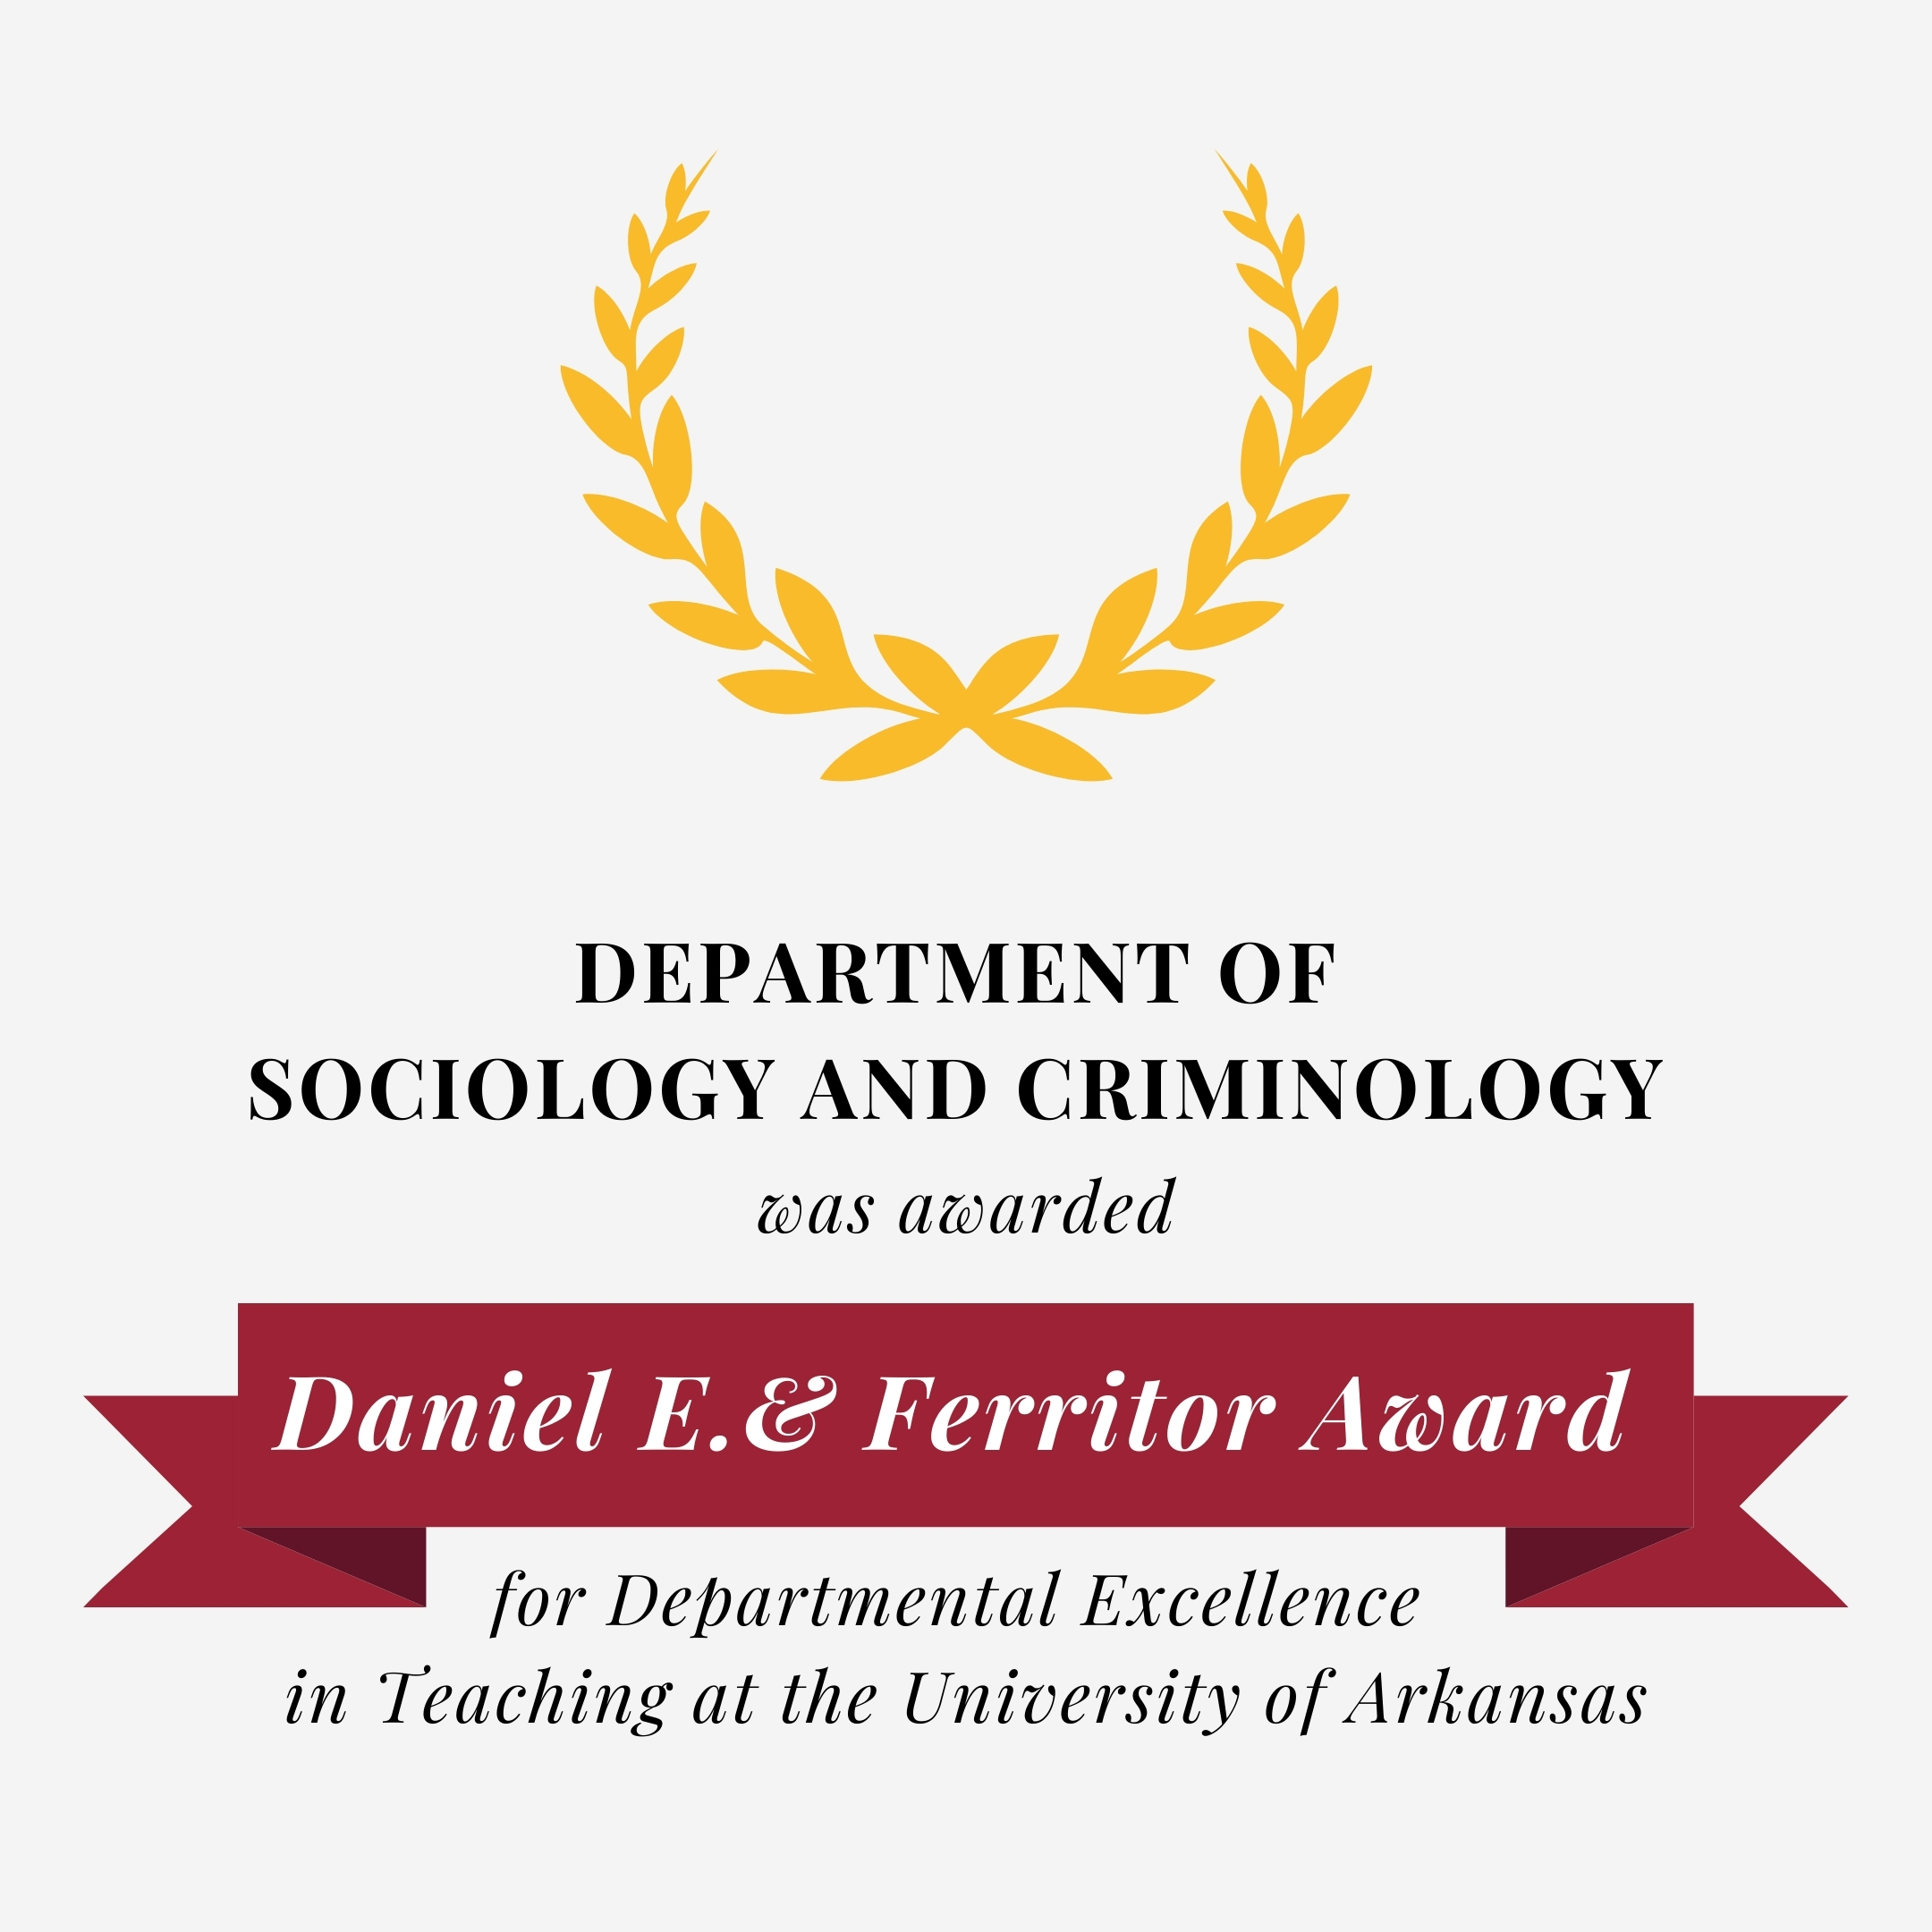 Department of Sociology and Criminology received the 2021 Daniel E. Ferritor Award for Departmental Excellence in Teaching at the University of Arkansas.